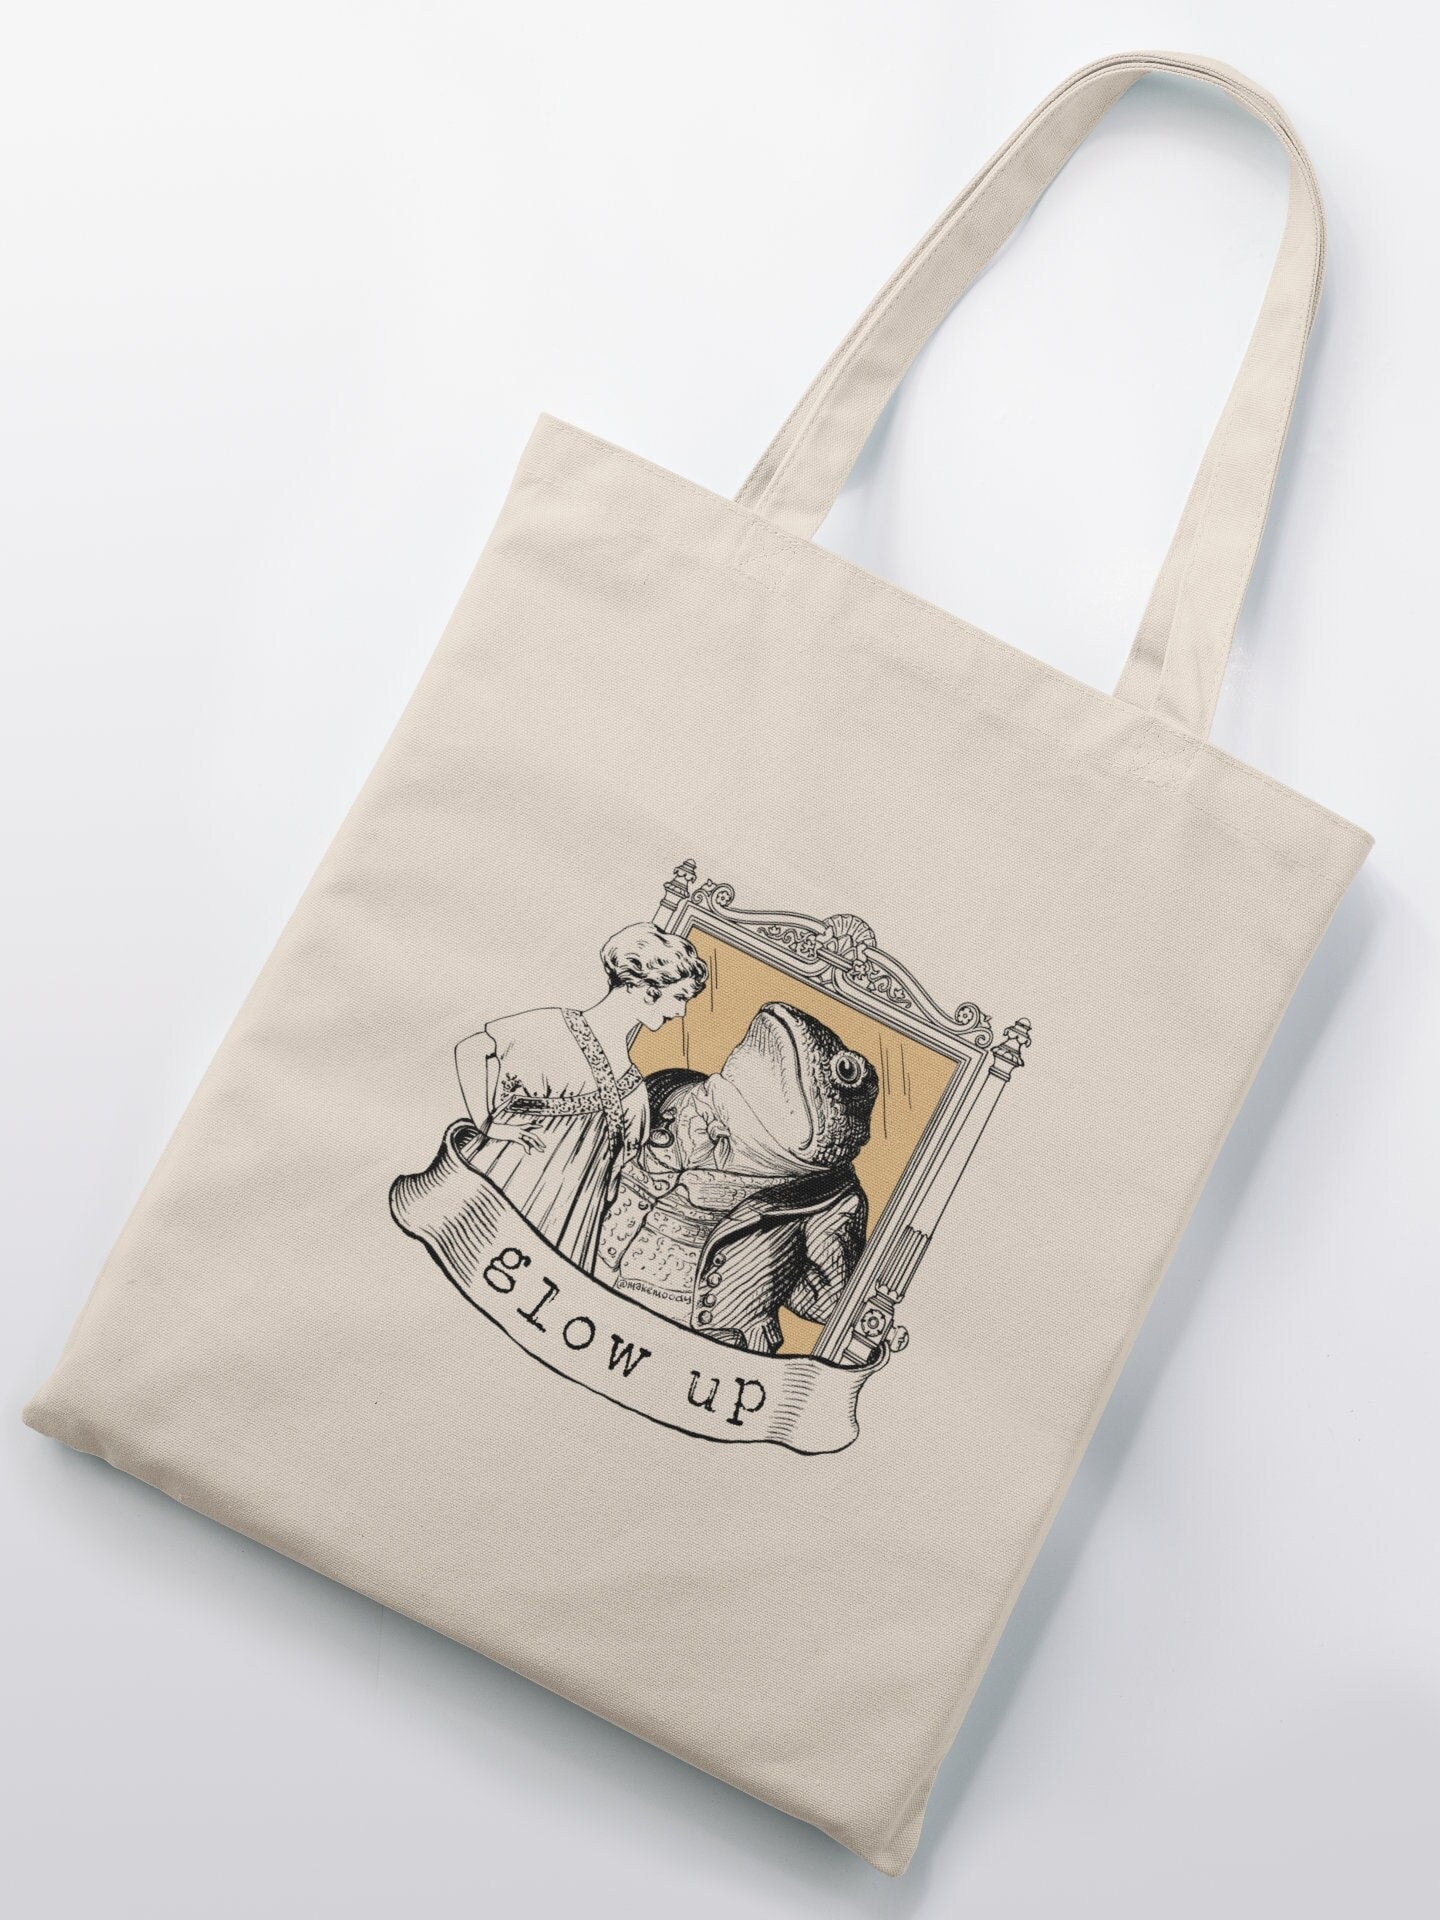 Glow Up TOTE BAG - Tote Bag - Feminist Gift, Feminism Gift, Cool Girl Gift, Toad Gift, Glow Up Gift, Self Love Gift, Empowerment Gift